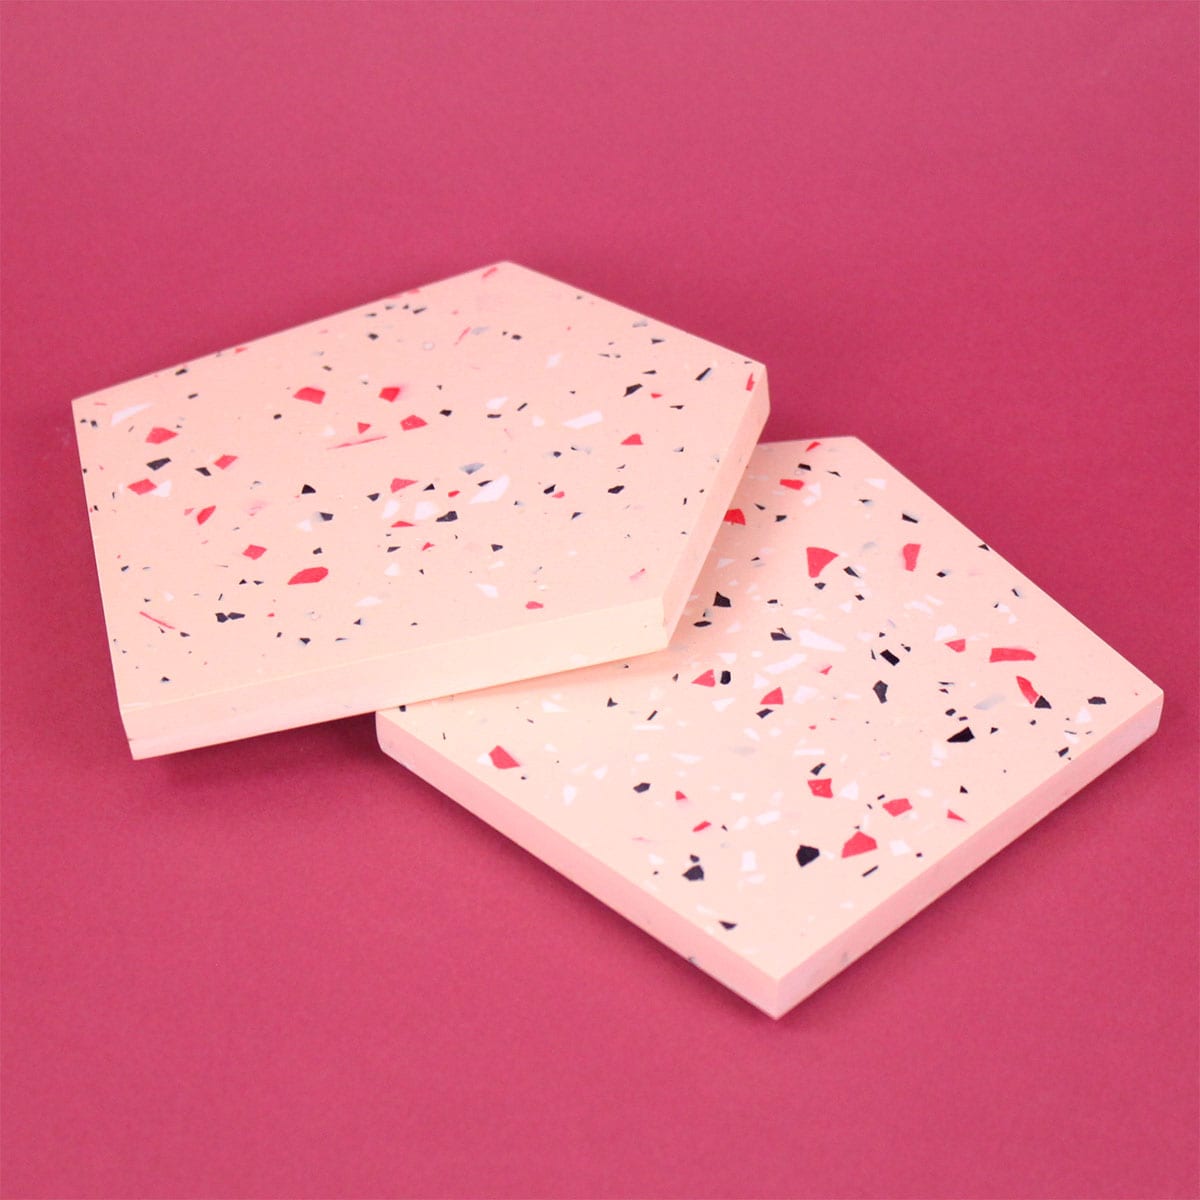 SET OF TWO FRECKLED COASTERS